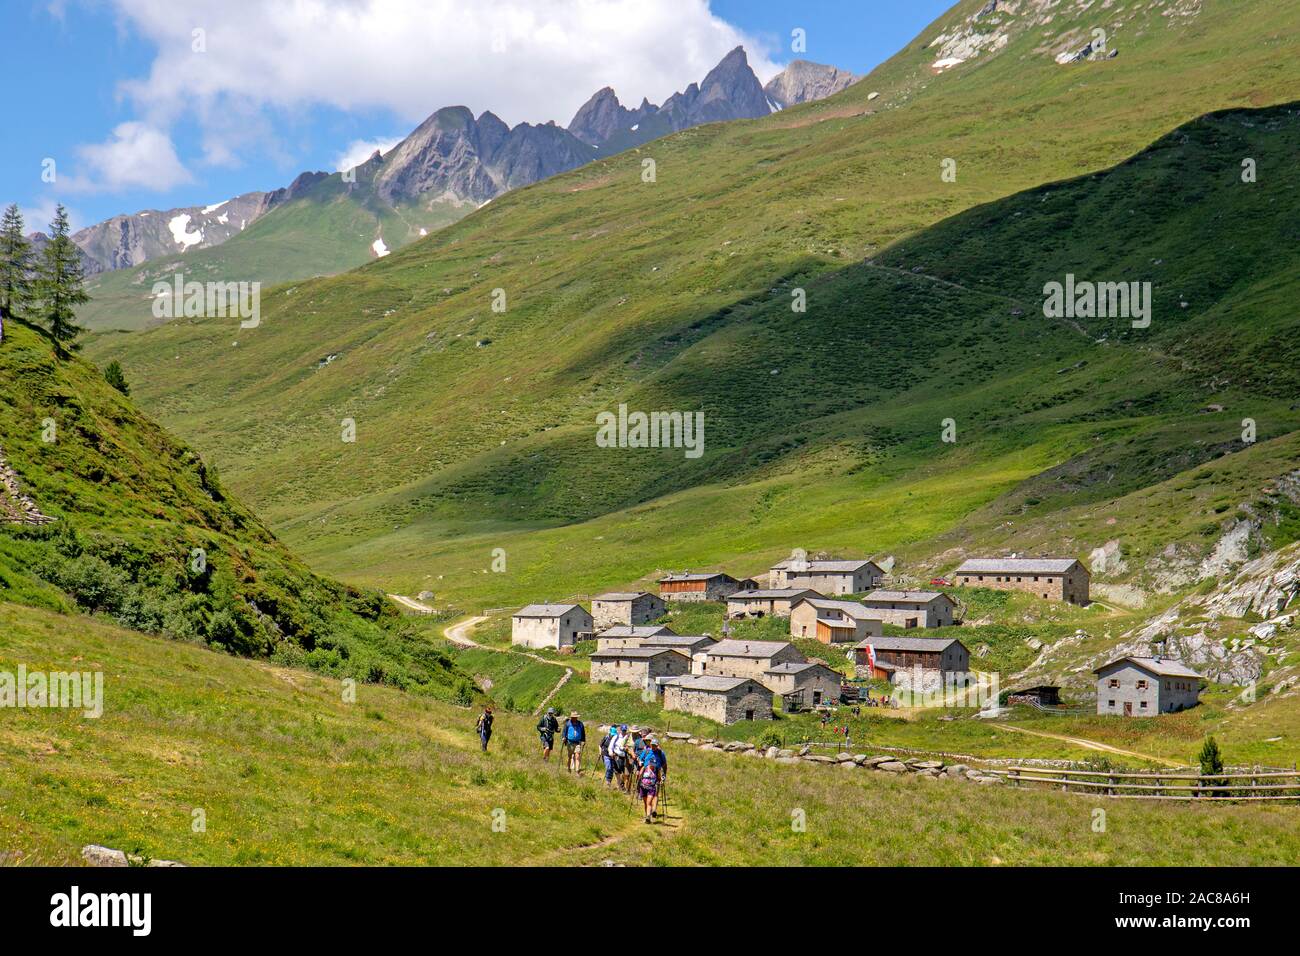 The summer pasture village of Jagdhausalm in the Oberhauser Valley in Hohe Tauern National Park Stock Photo